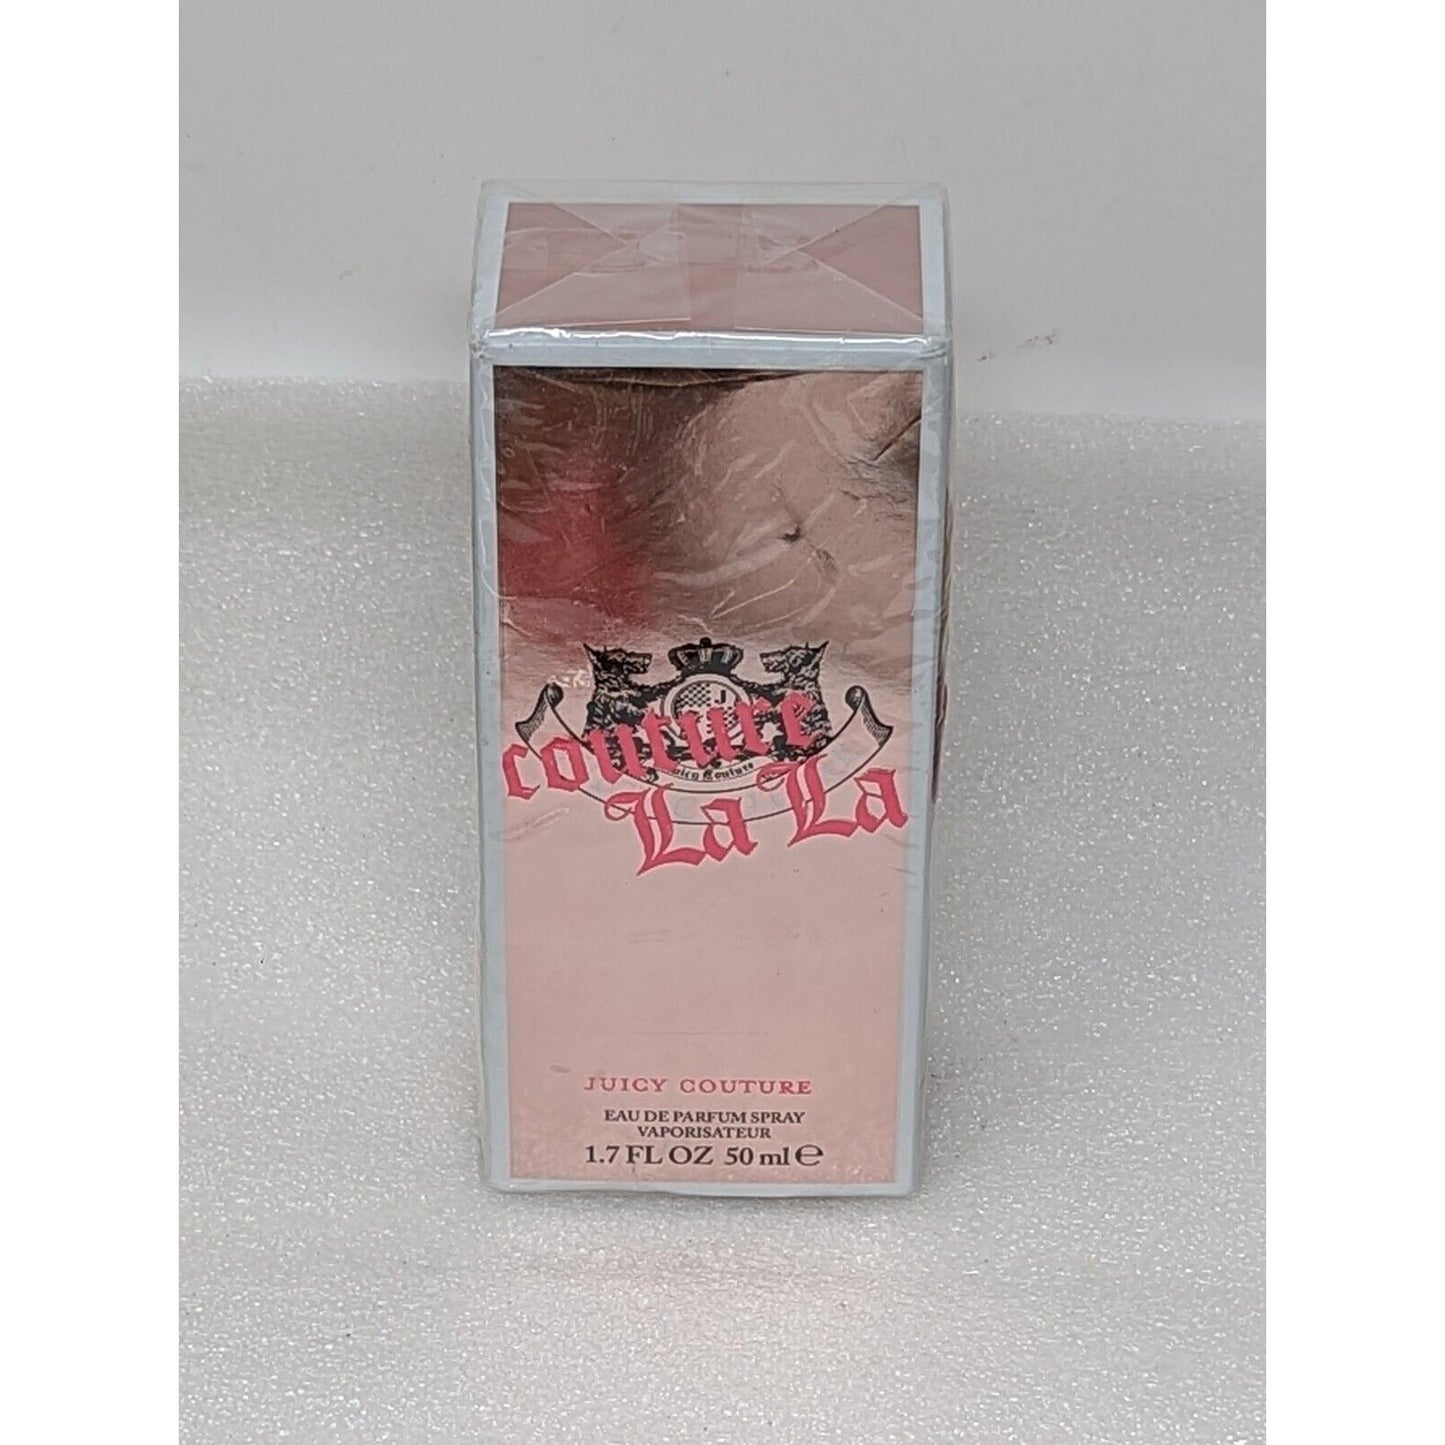 Couture La La by Juicy Couture 1.7 oz EDP Perfume Spray for Women Sealed